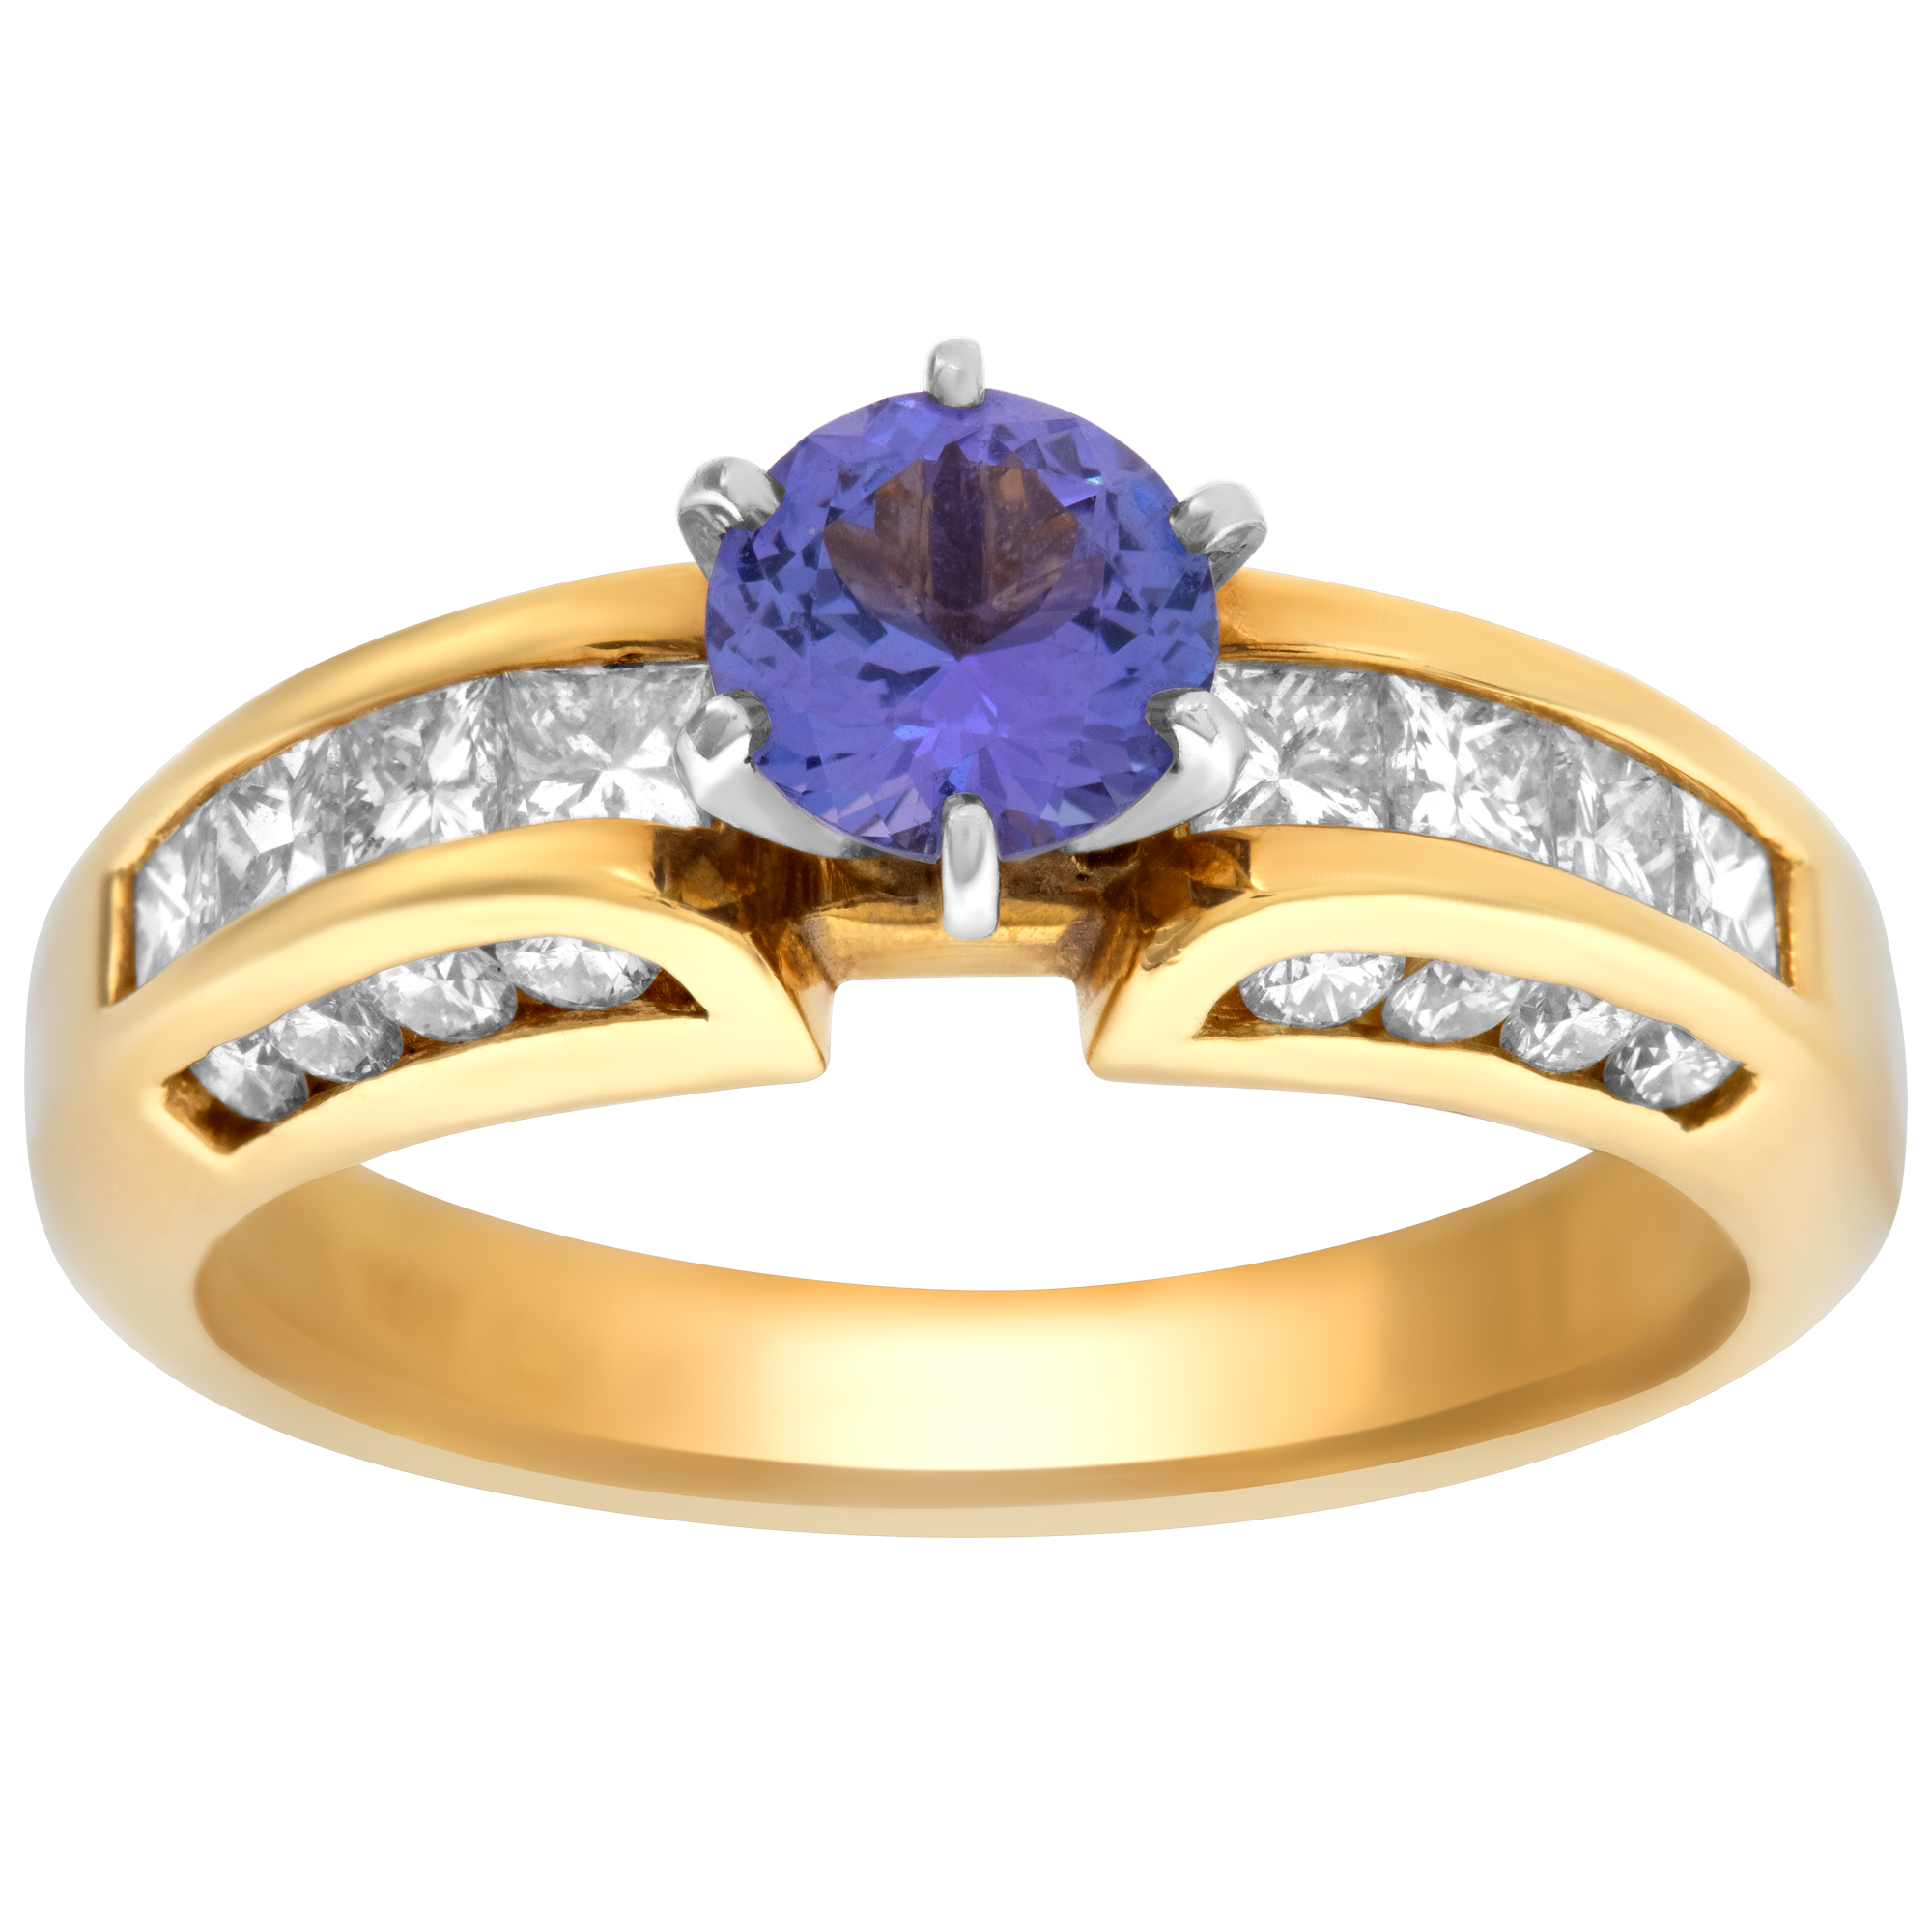 Tanzanite ring with 0.75cts of diamonds accenting top & sides of band. Size 8.25. image 1